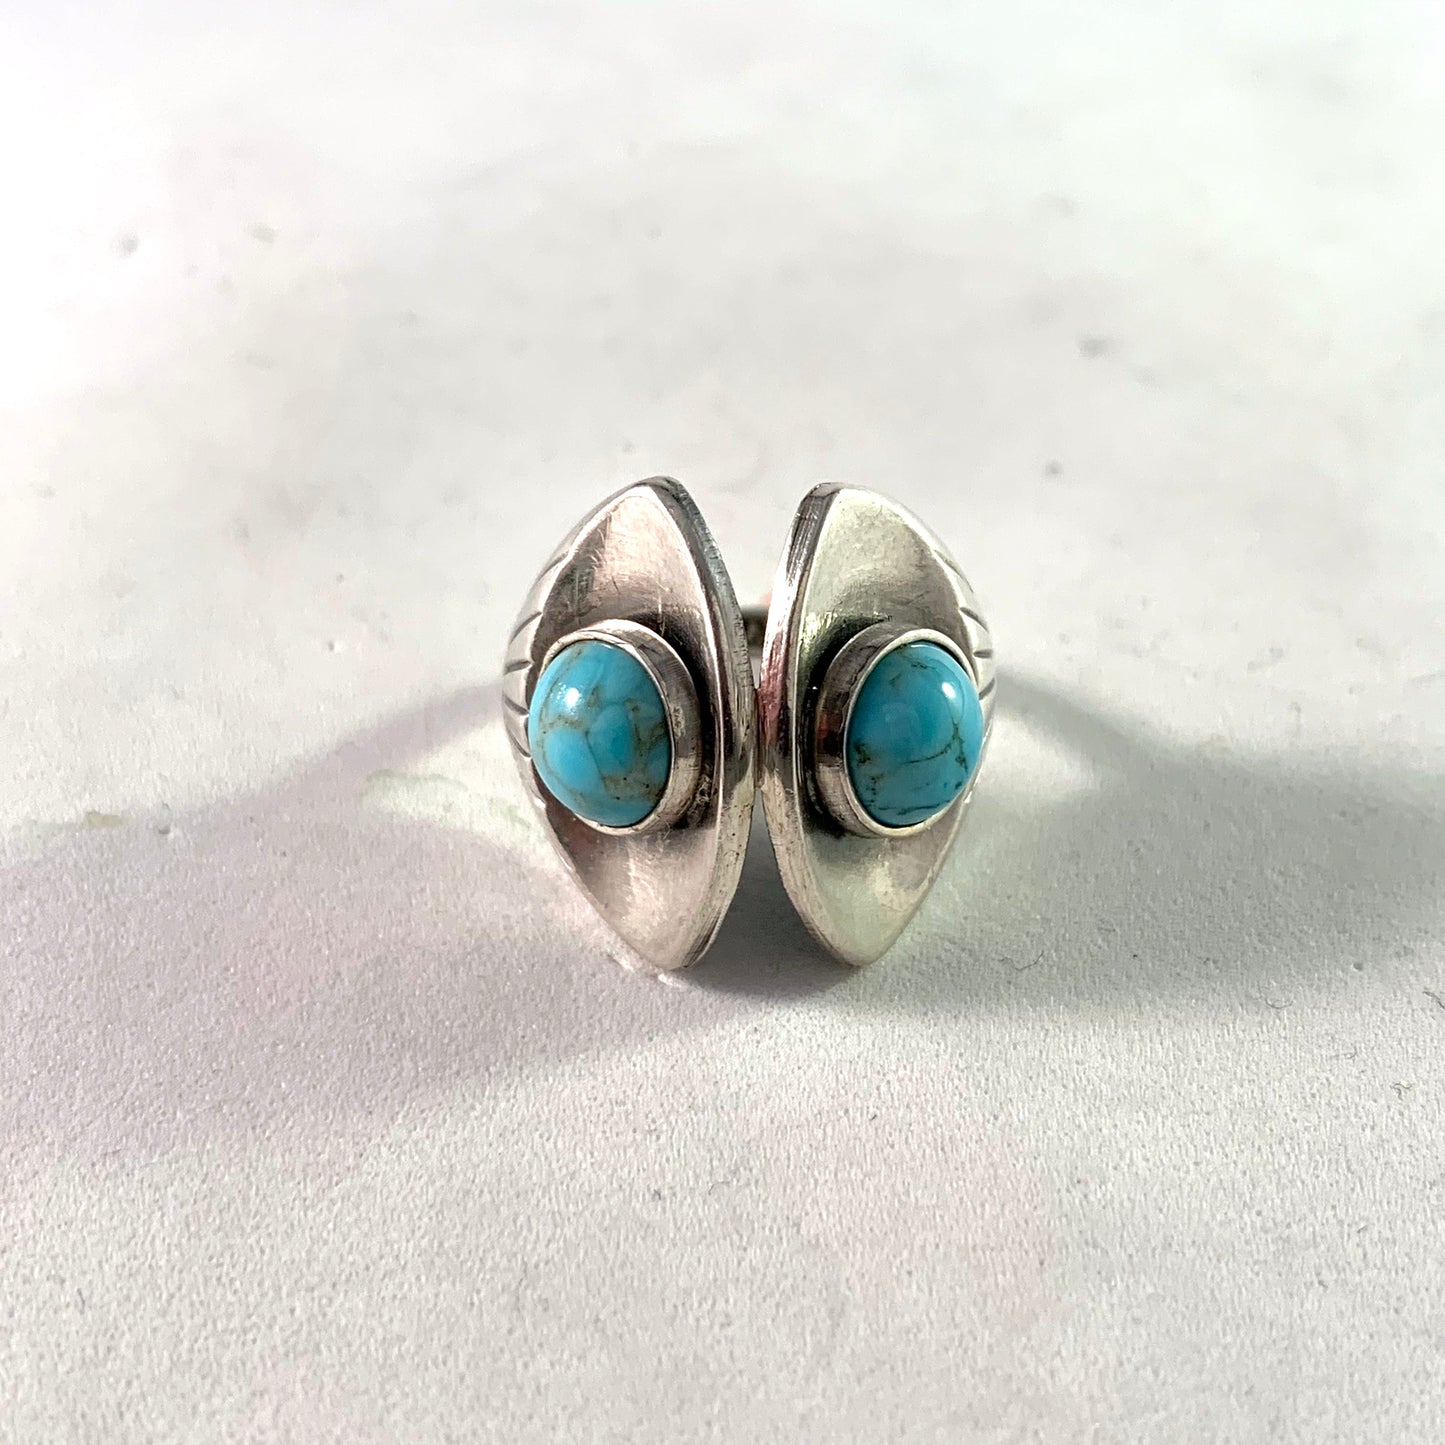 Alton, Sweden 1956 Mid Century Modern Sterling Silver Turquoise Ring.